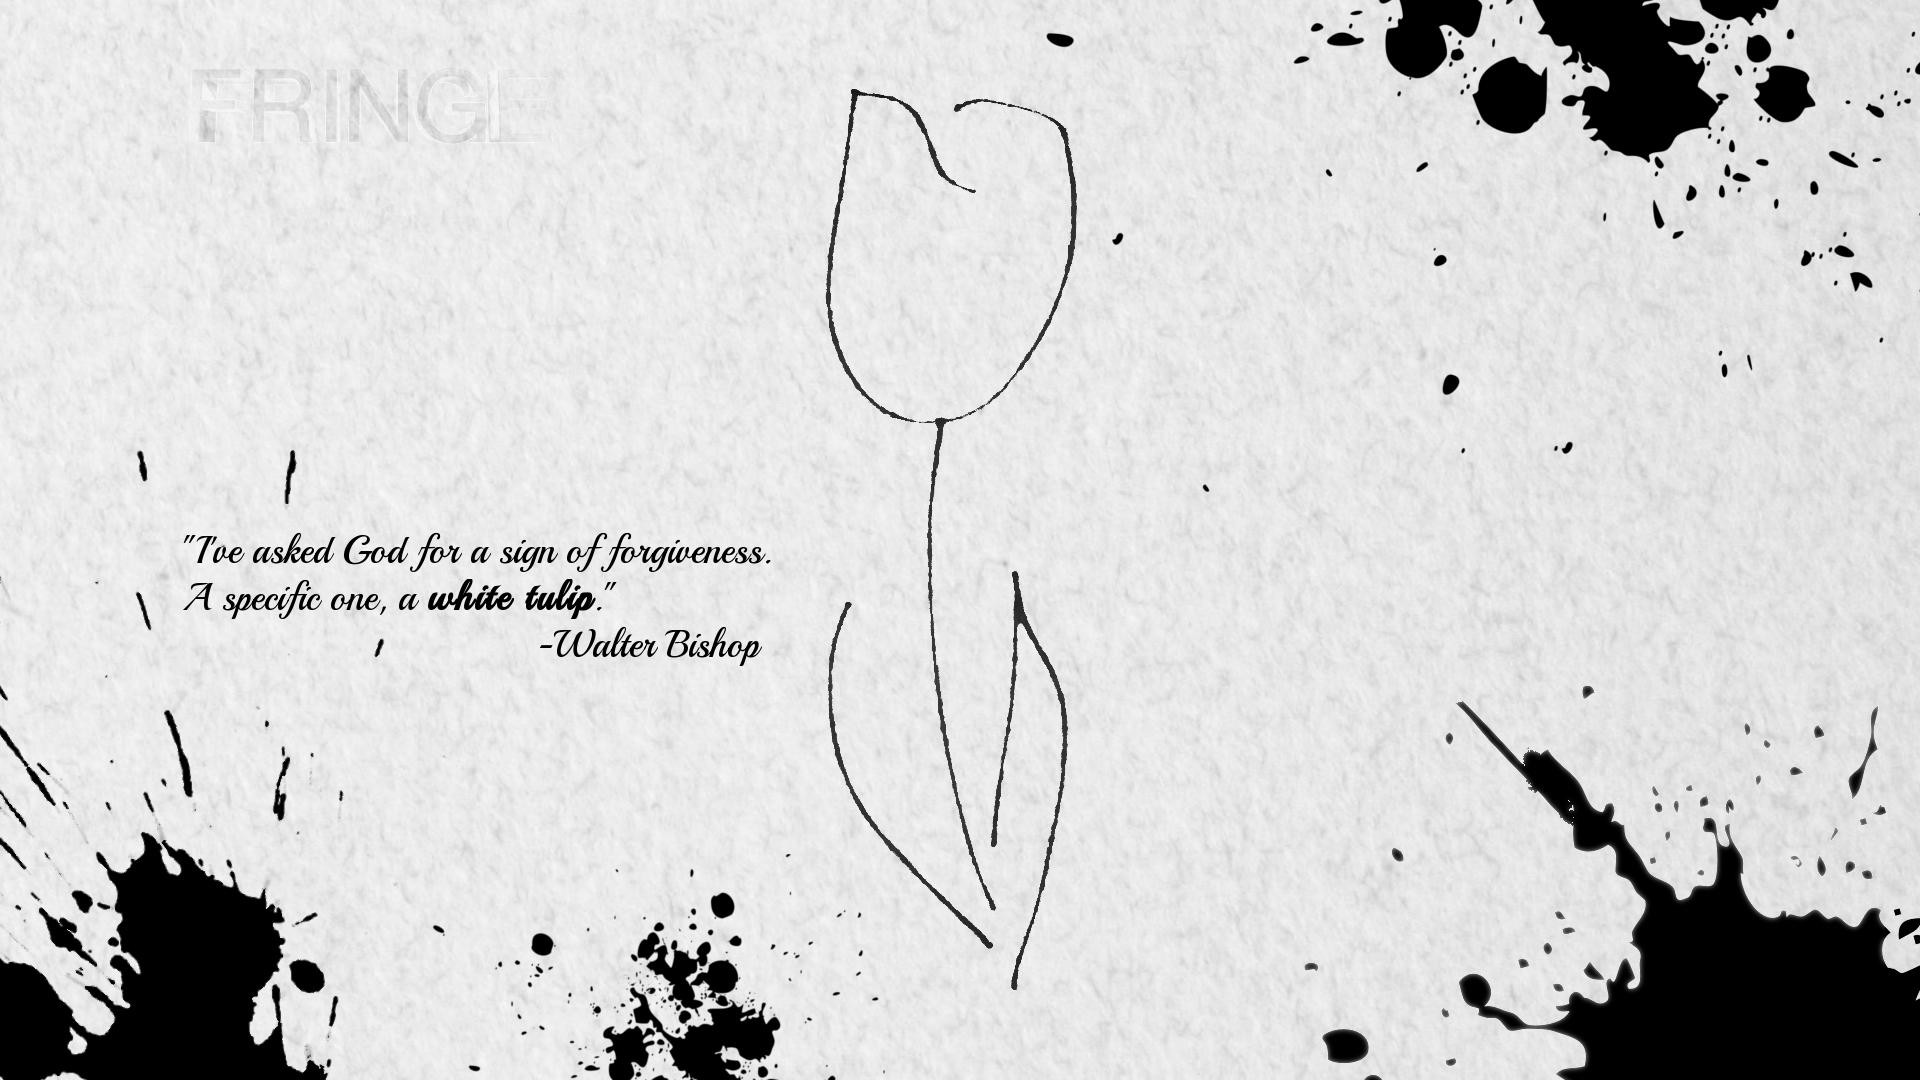 1920x1080, Nothing Has Been Able To Fill The Void Fringe - Fringe White Tulip Tattoo - HD Wallpaper 